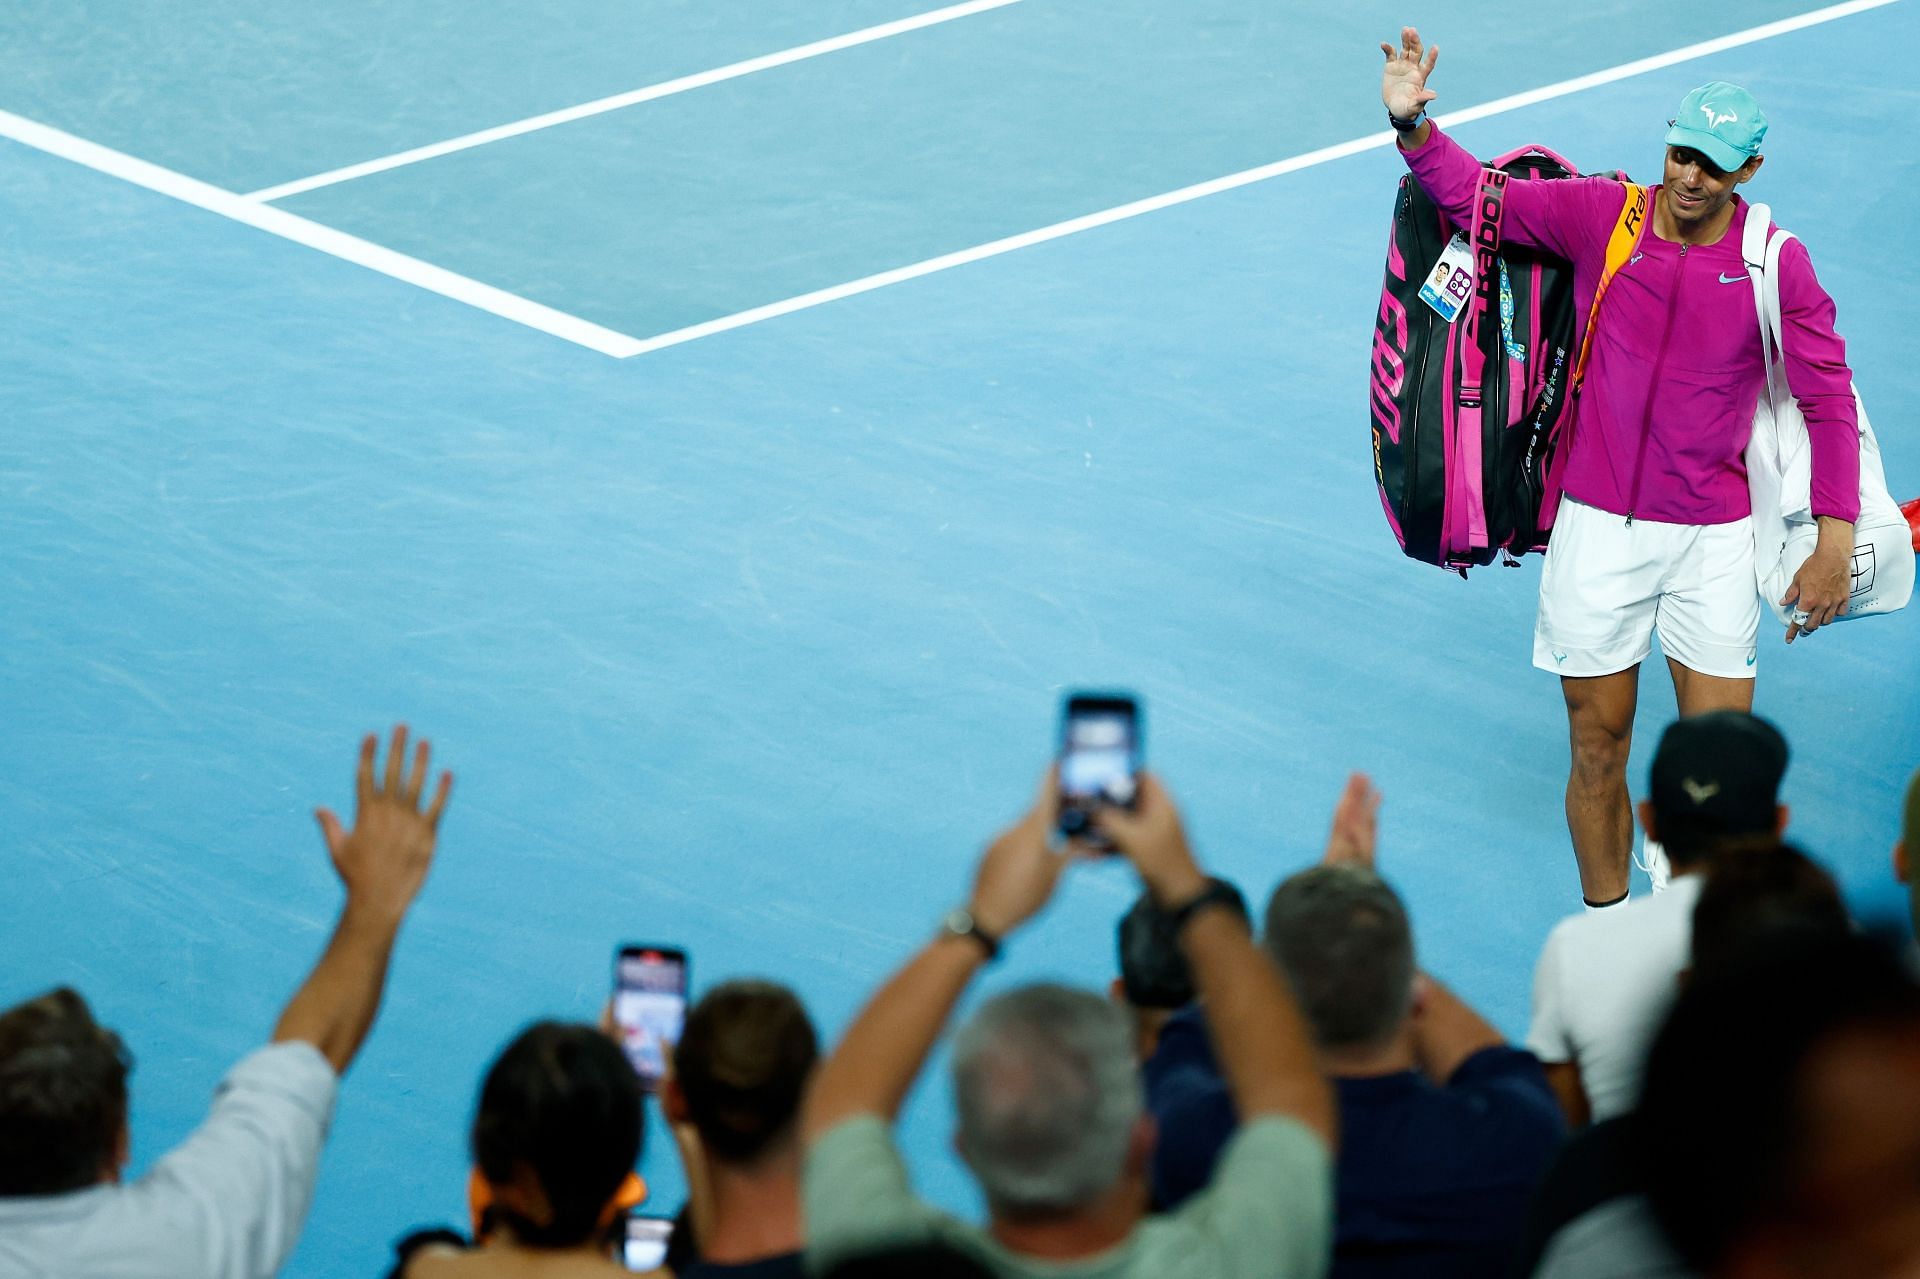 Rafael Nadal after winning the semifinals of the 2022 Australian Open